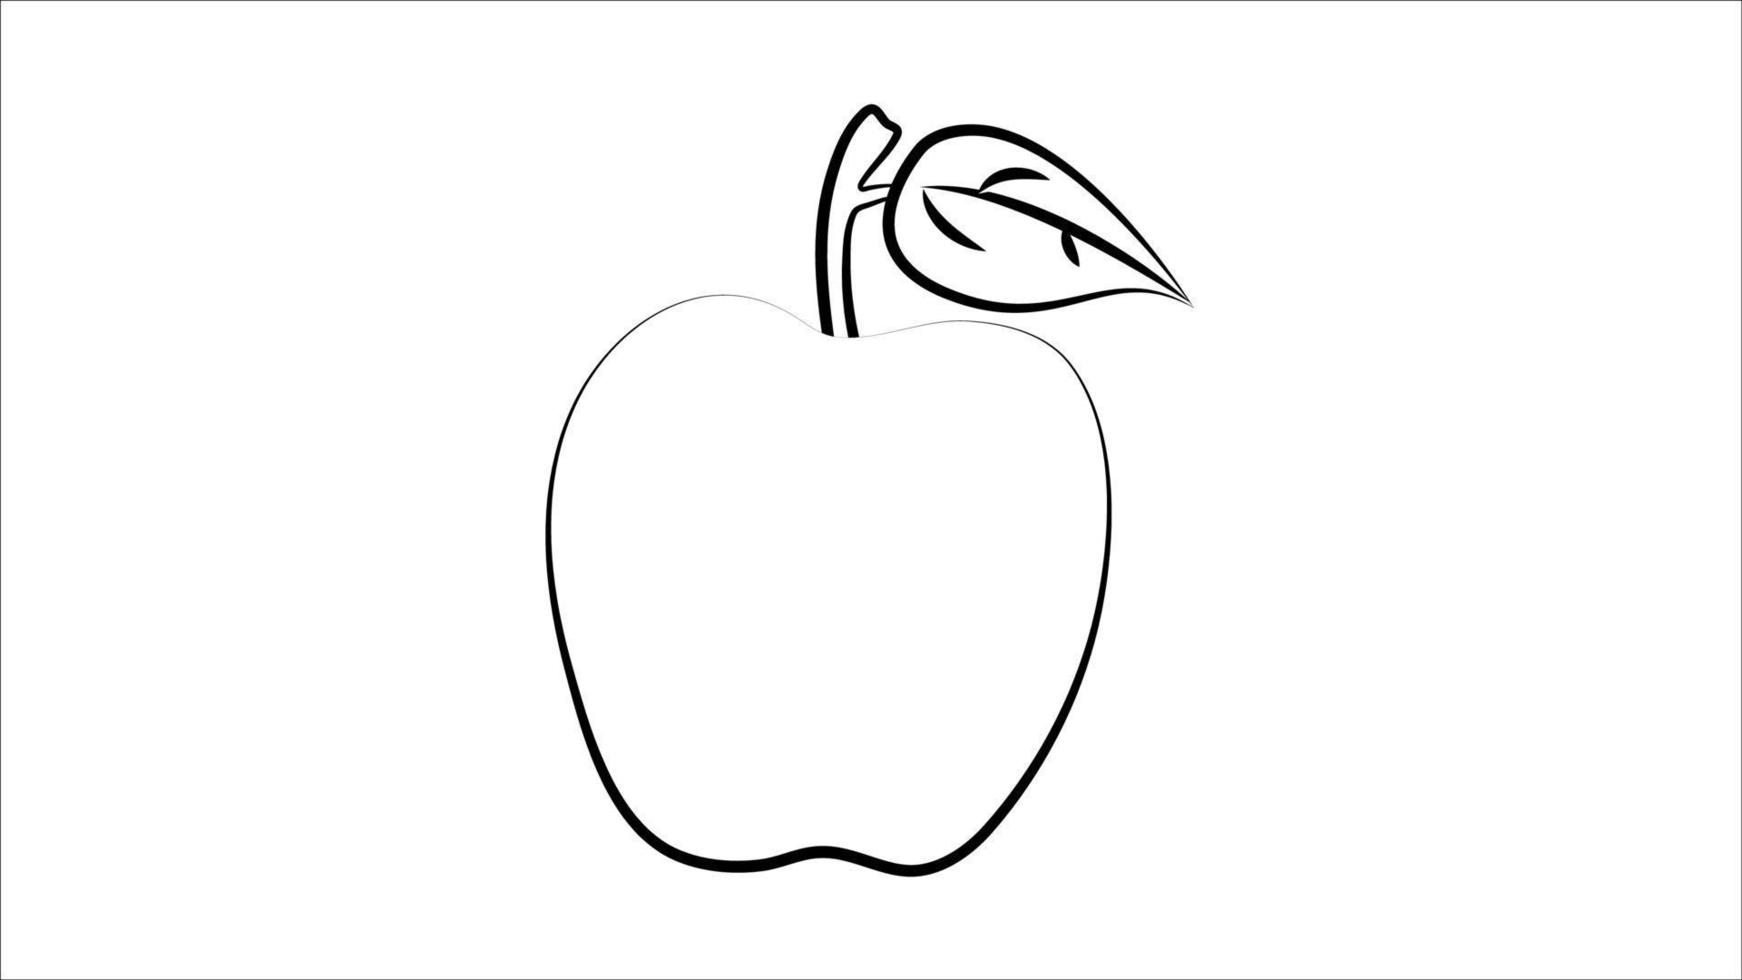 Apple fruit icon. flat simple pictogram. Apple with leaf vector illustration